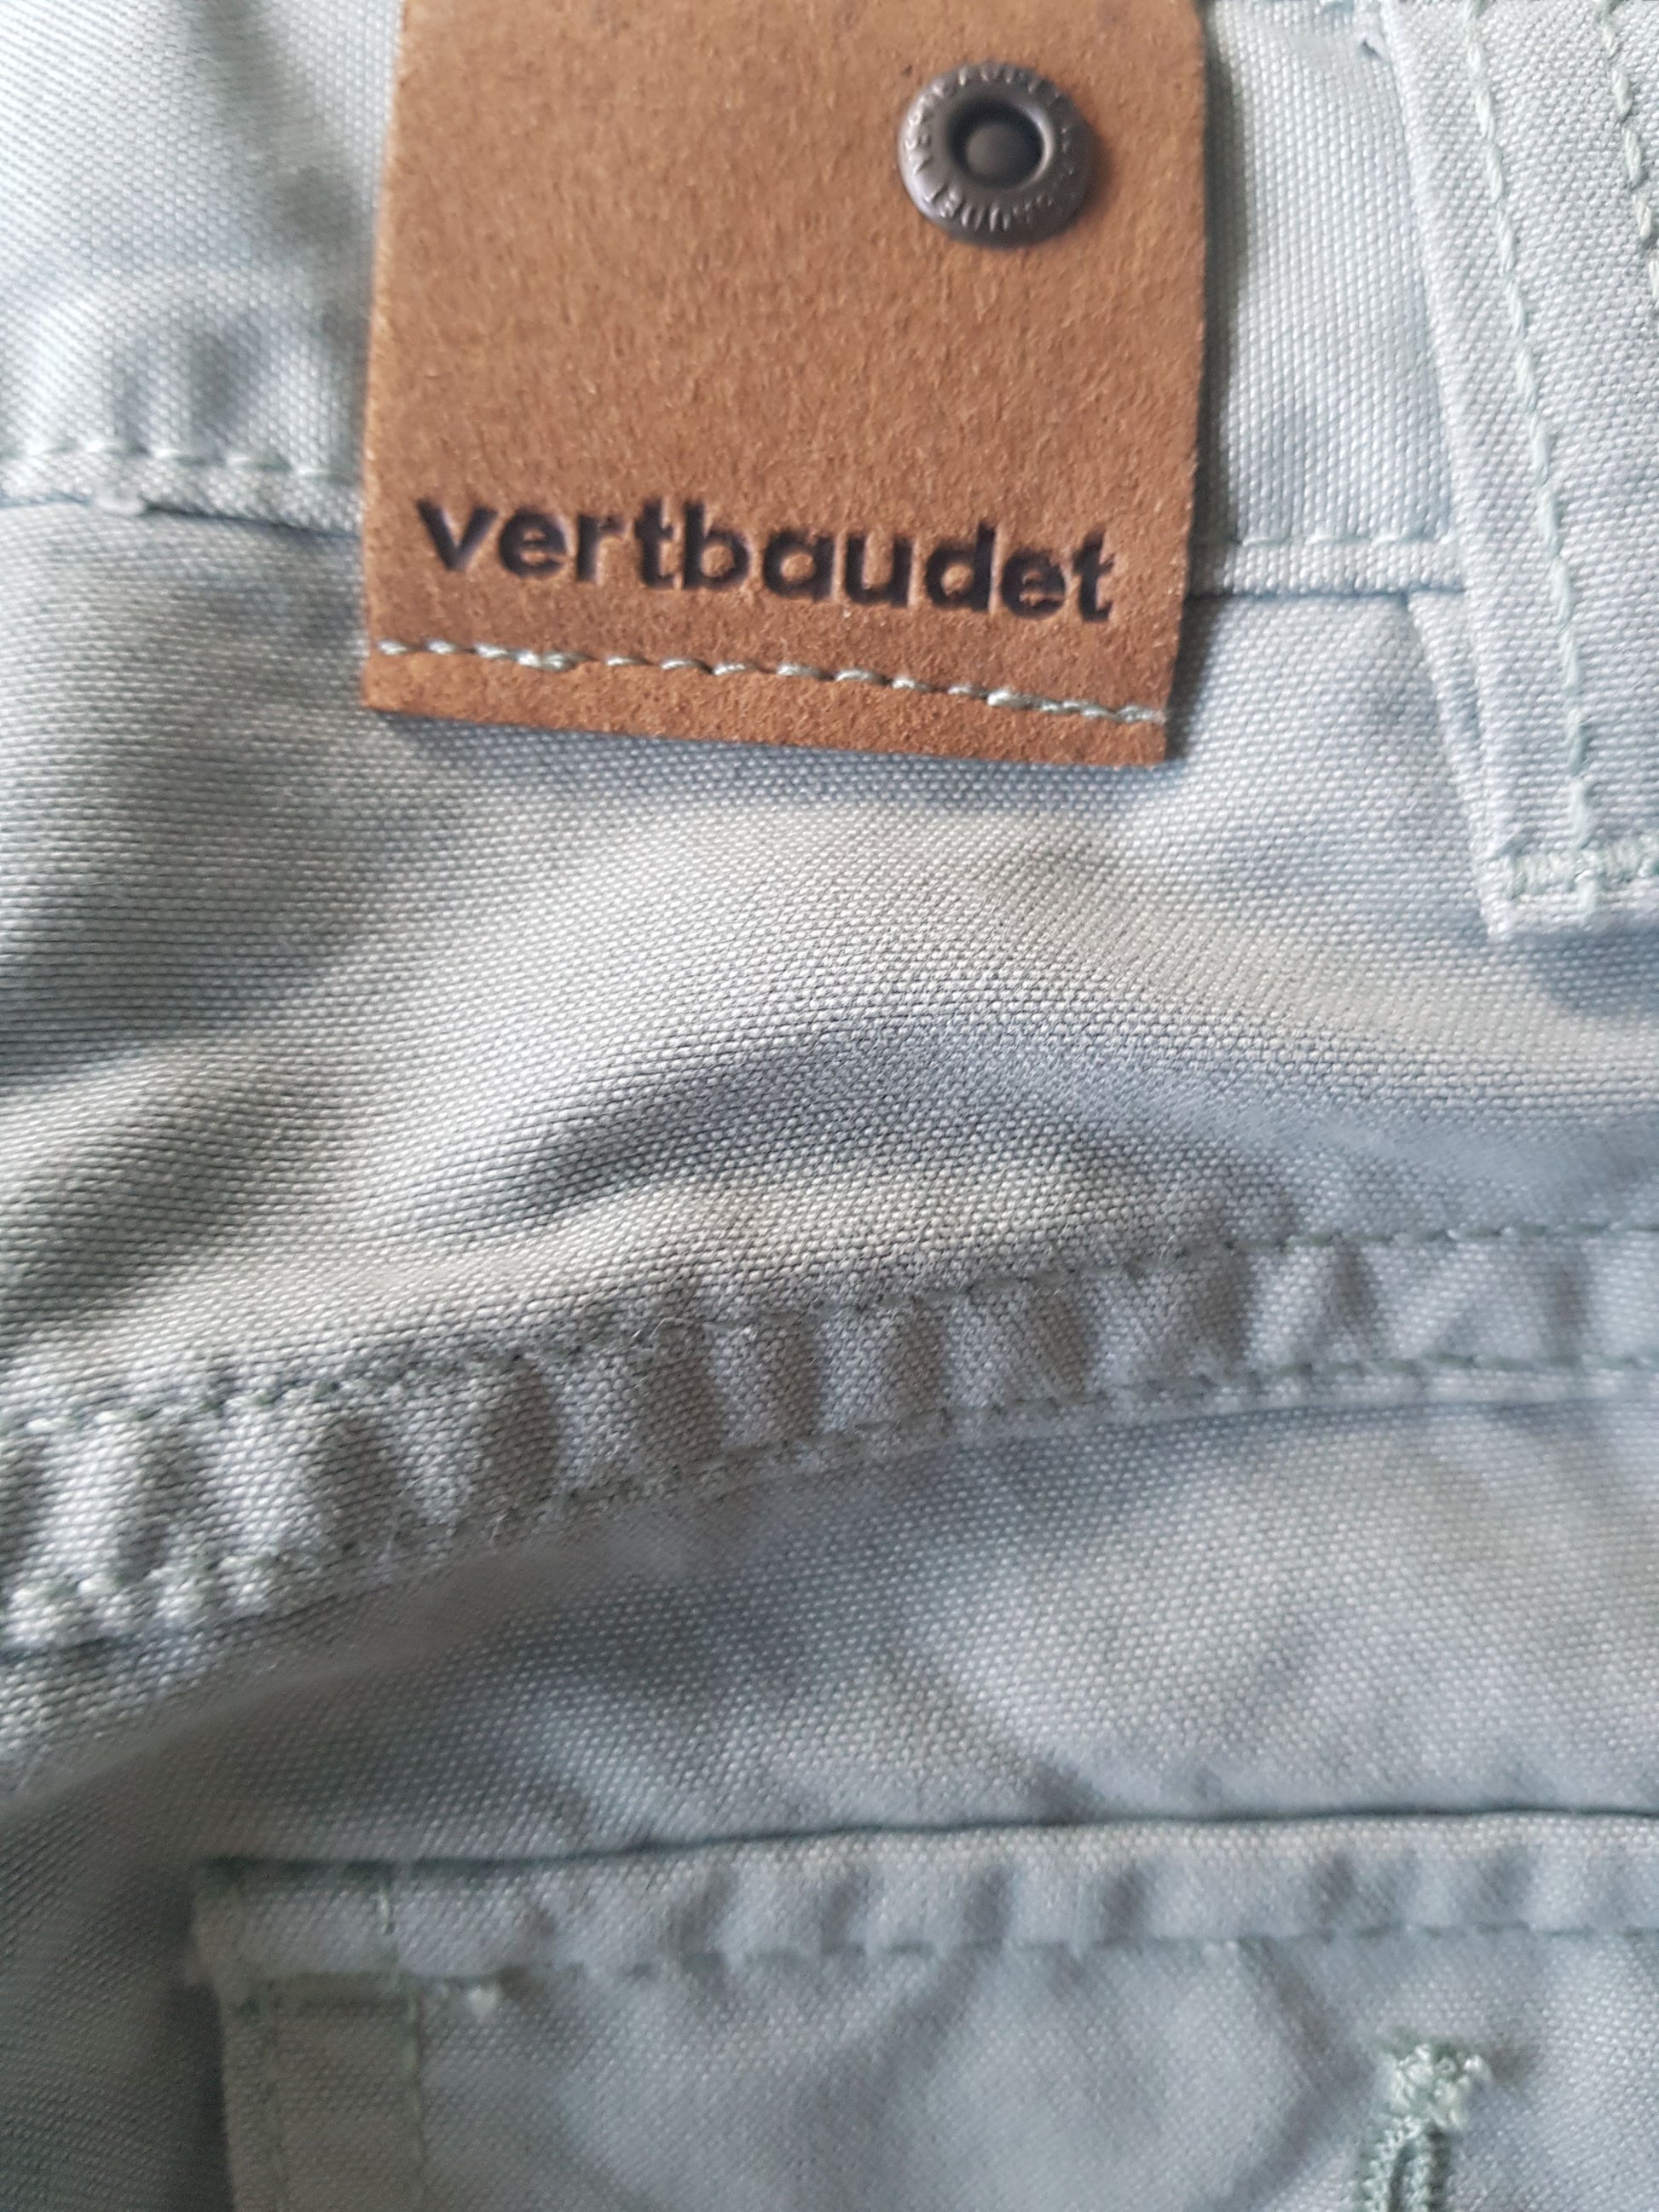 Vertbaudet New with Tags,126cm Vertbaudet  (6615491379385)